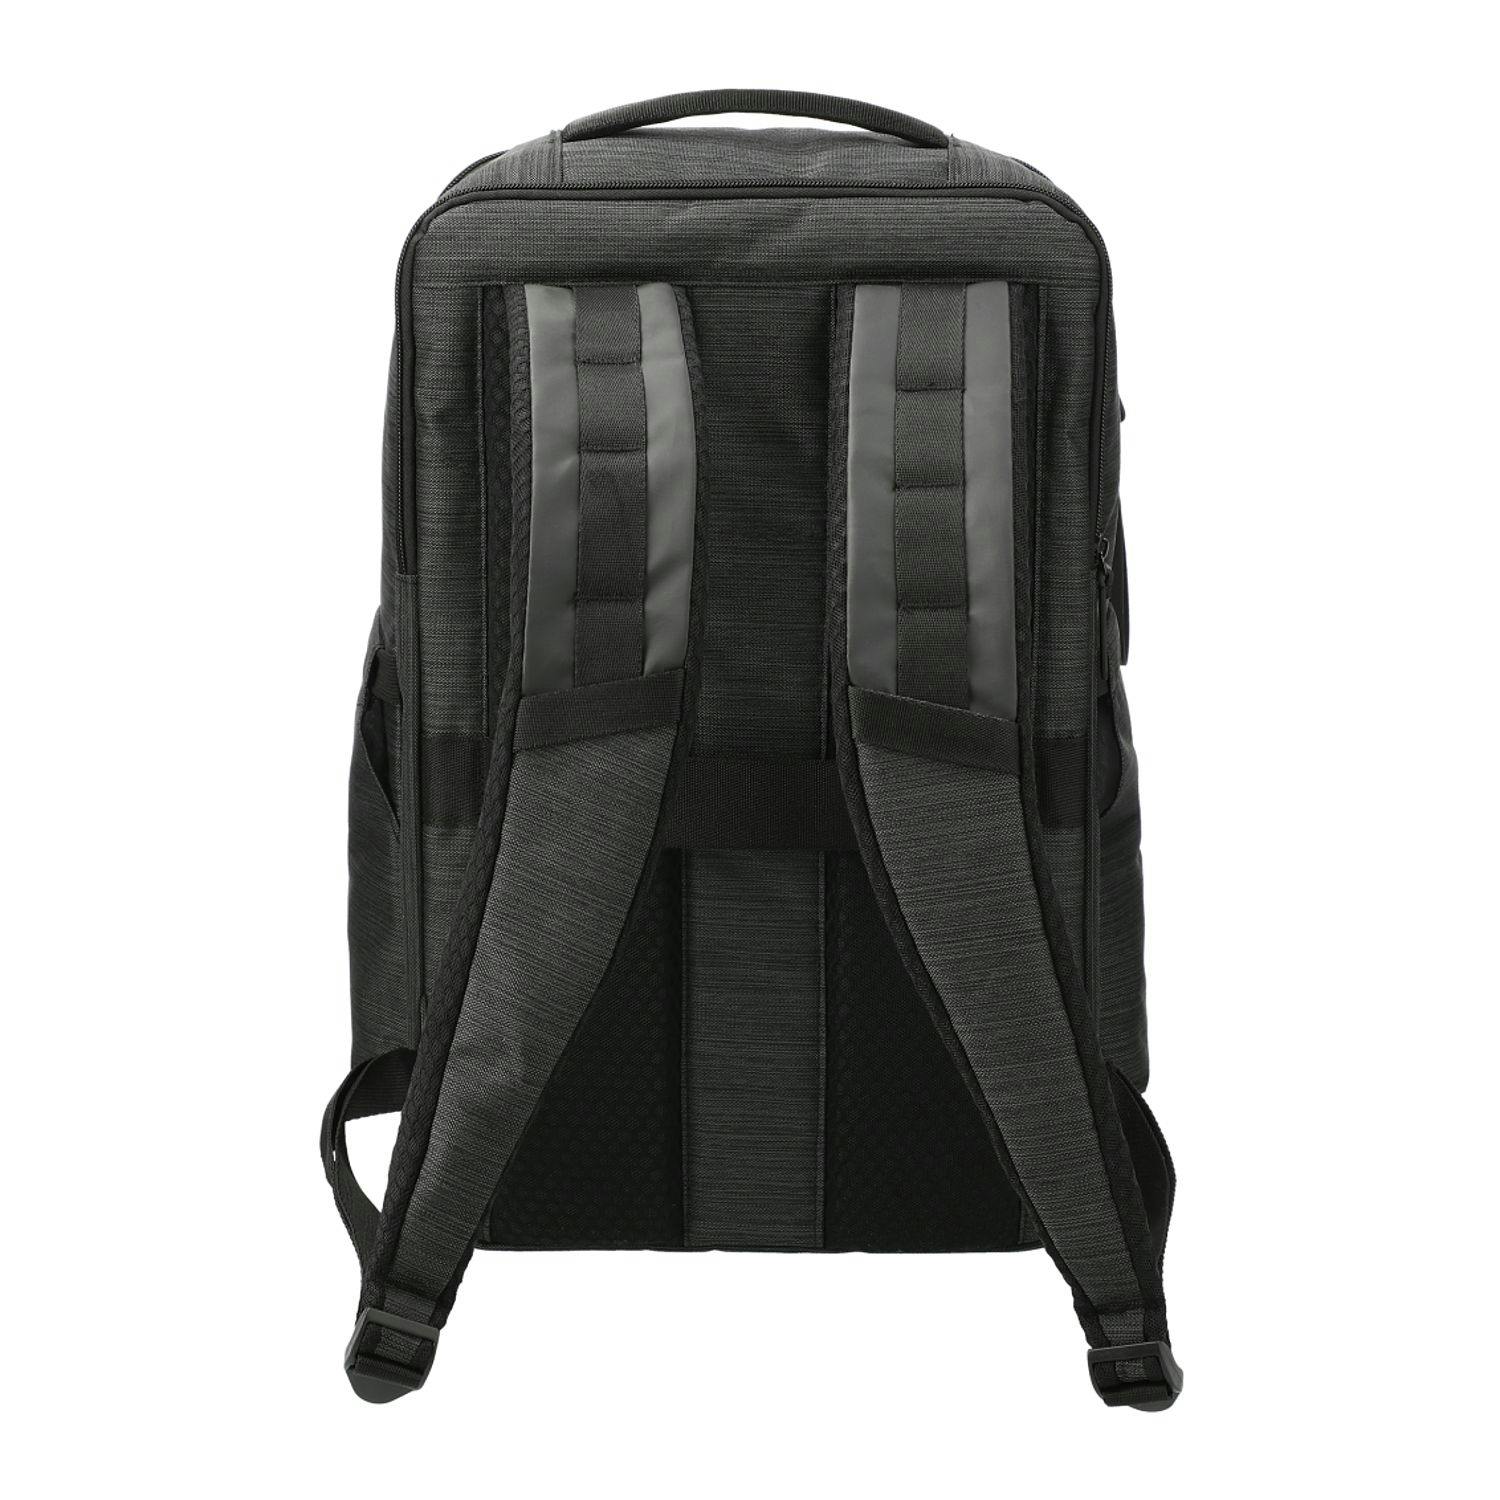 NBN Work Anywhere 15" Computer Backpack - additional Image 1